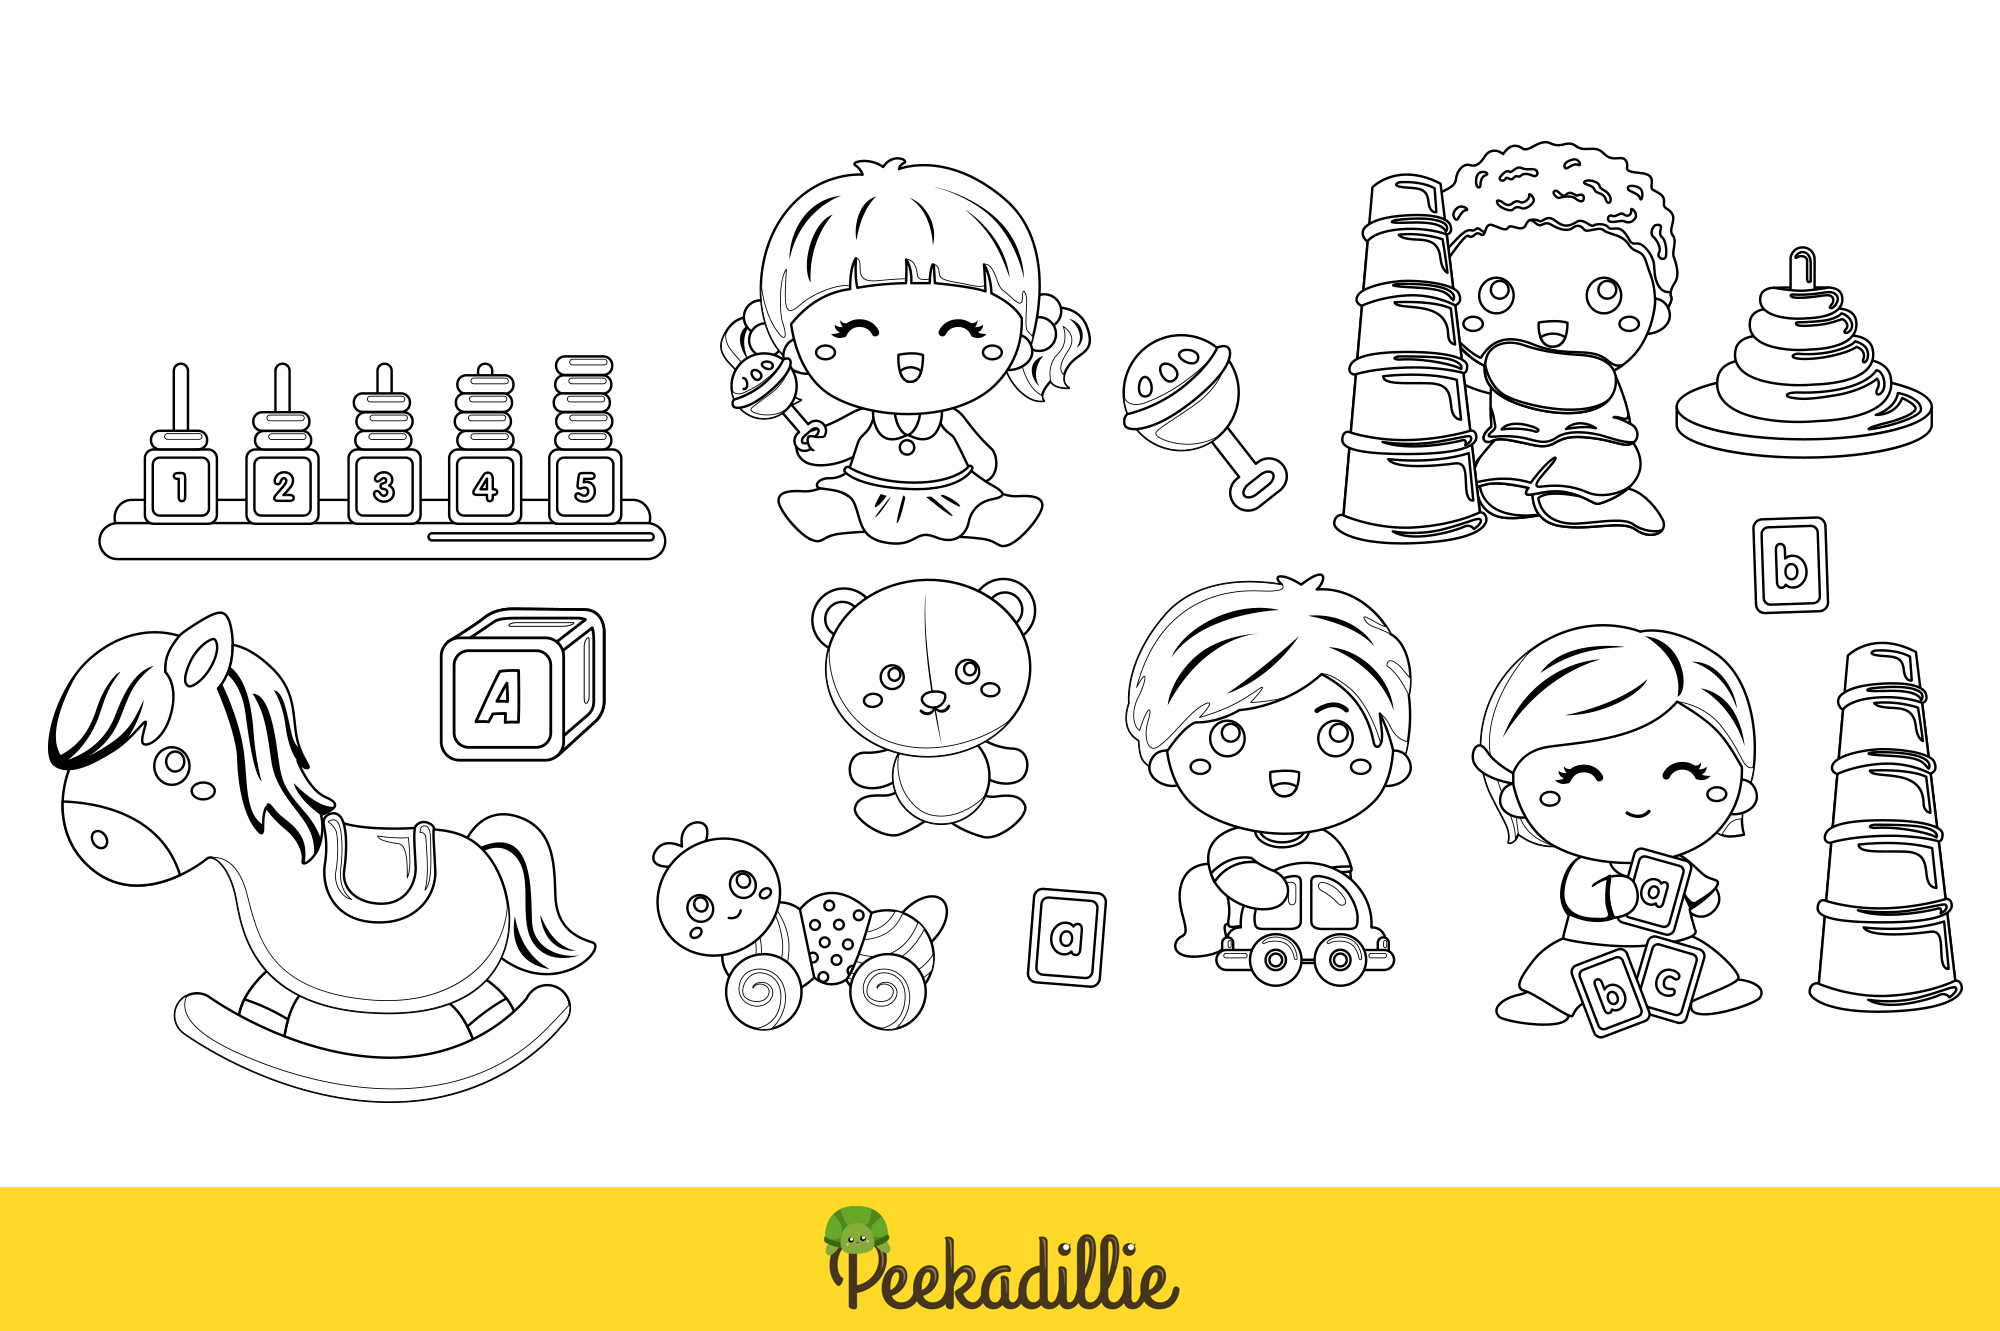 Baby and toys in an outline style.